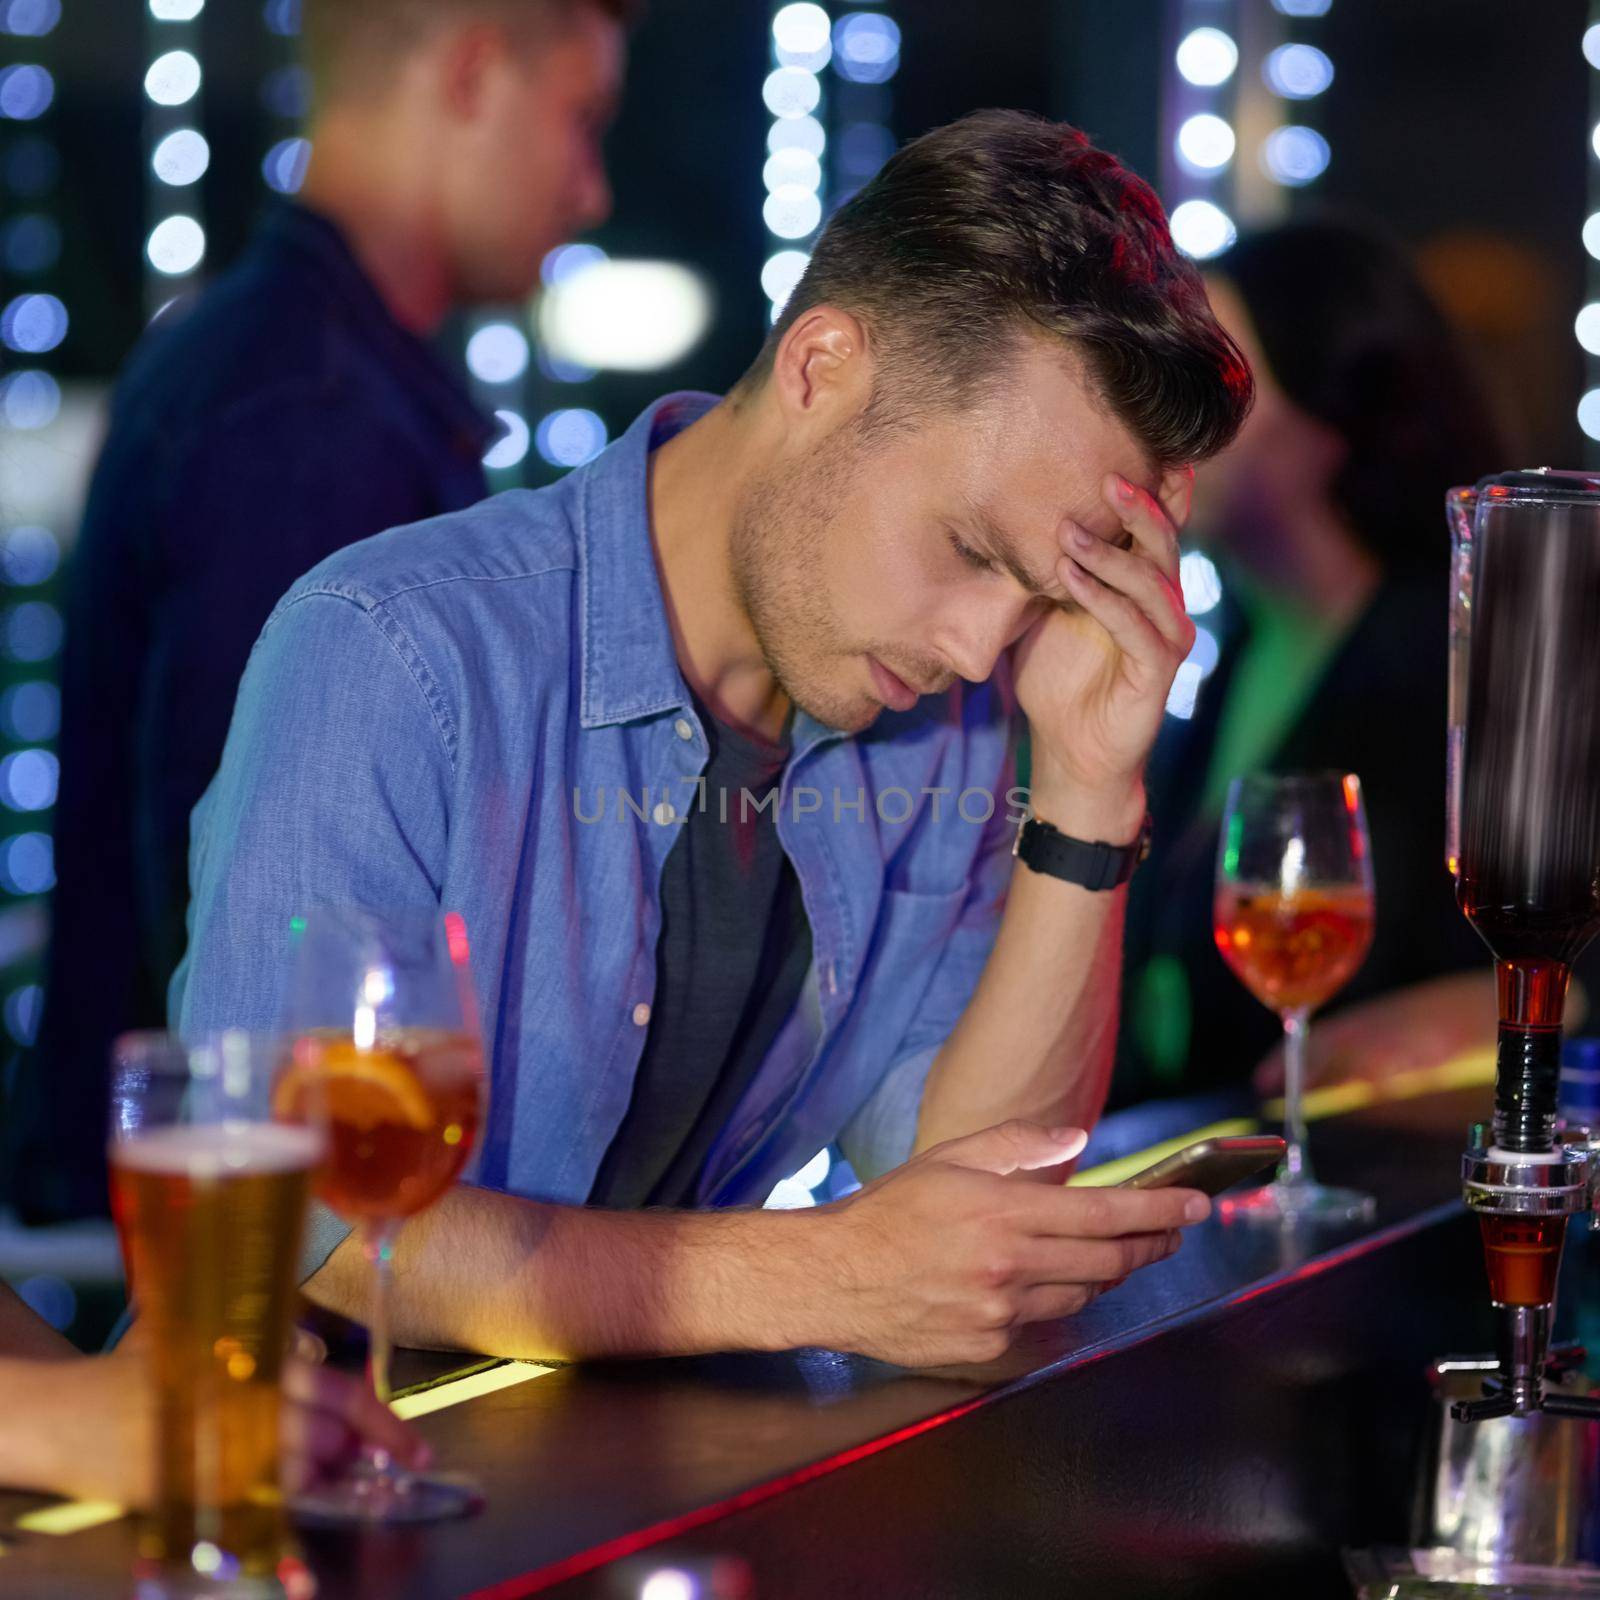 Shot of an upset looking young man reading a text on his cellphone while sitting at the counter of a nightclub.